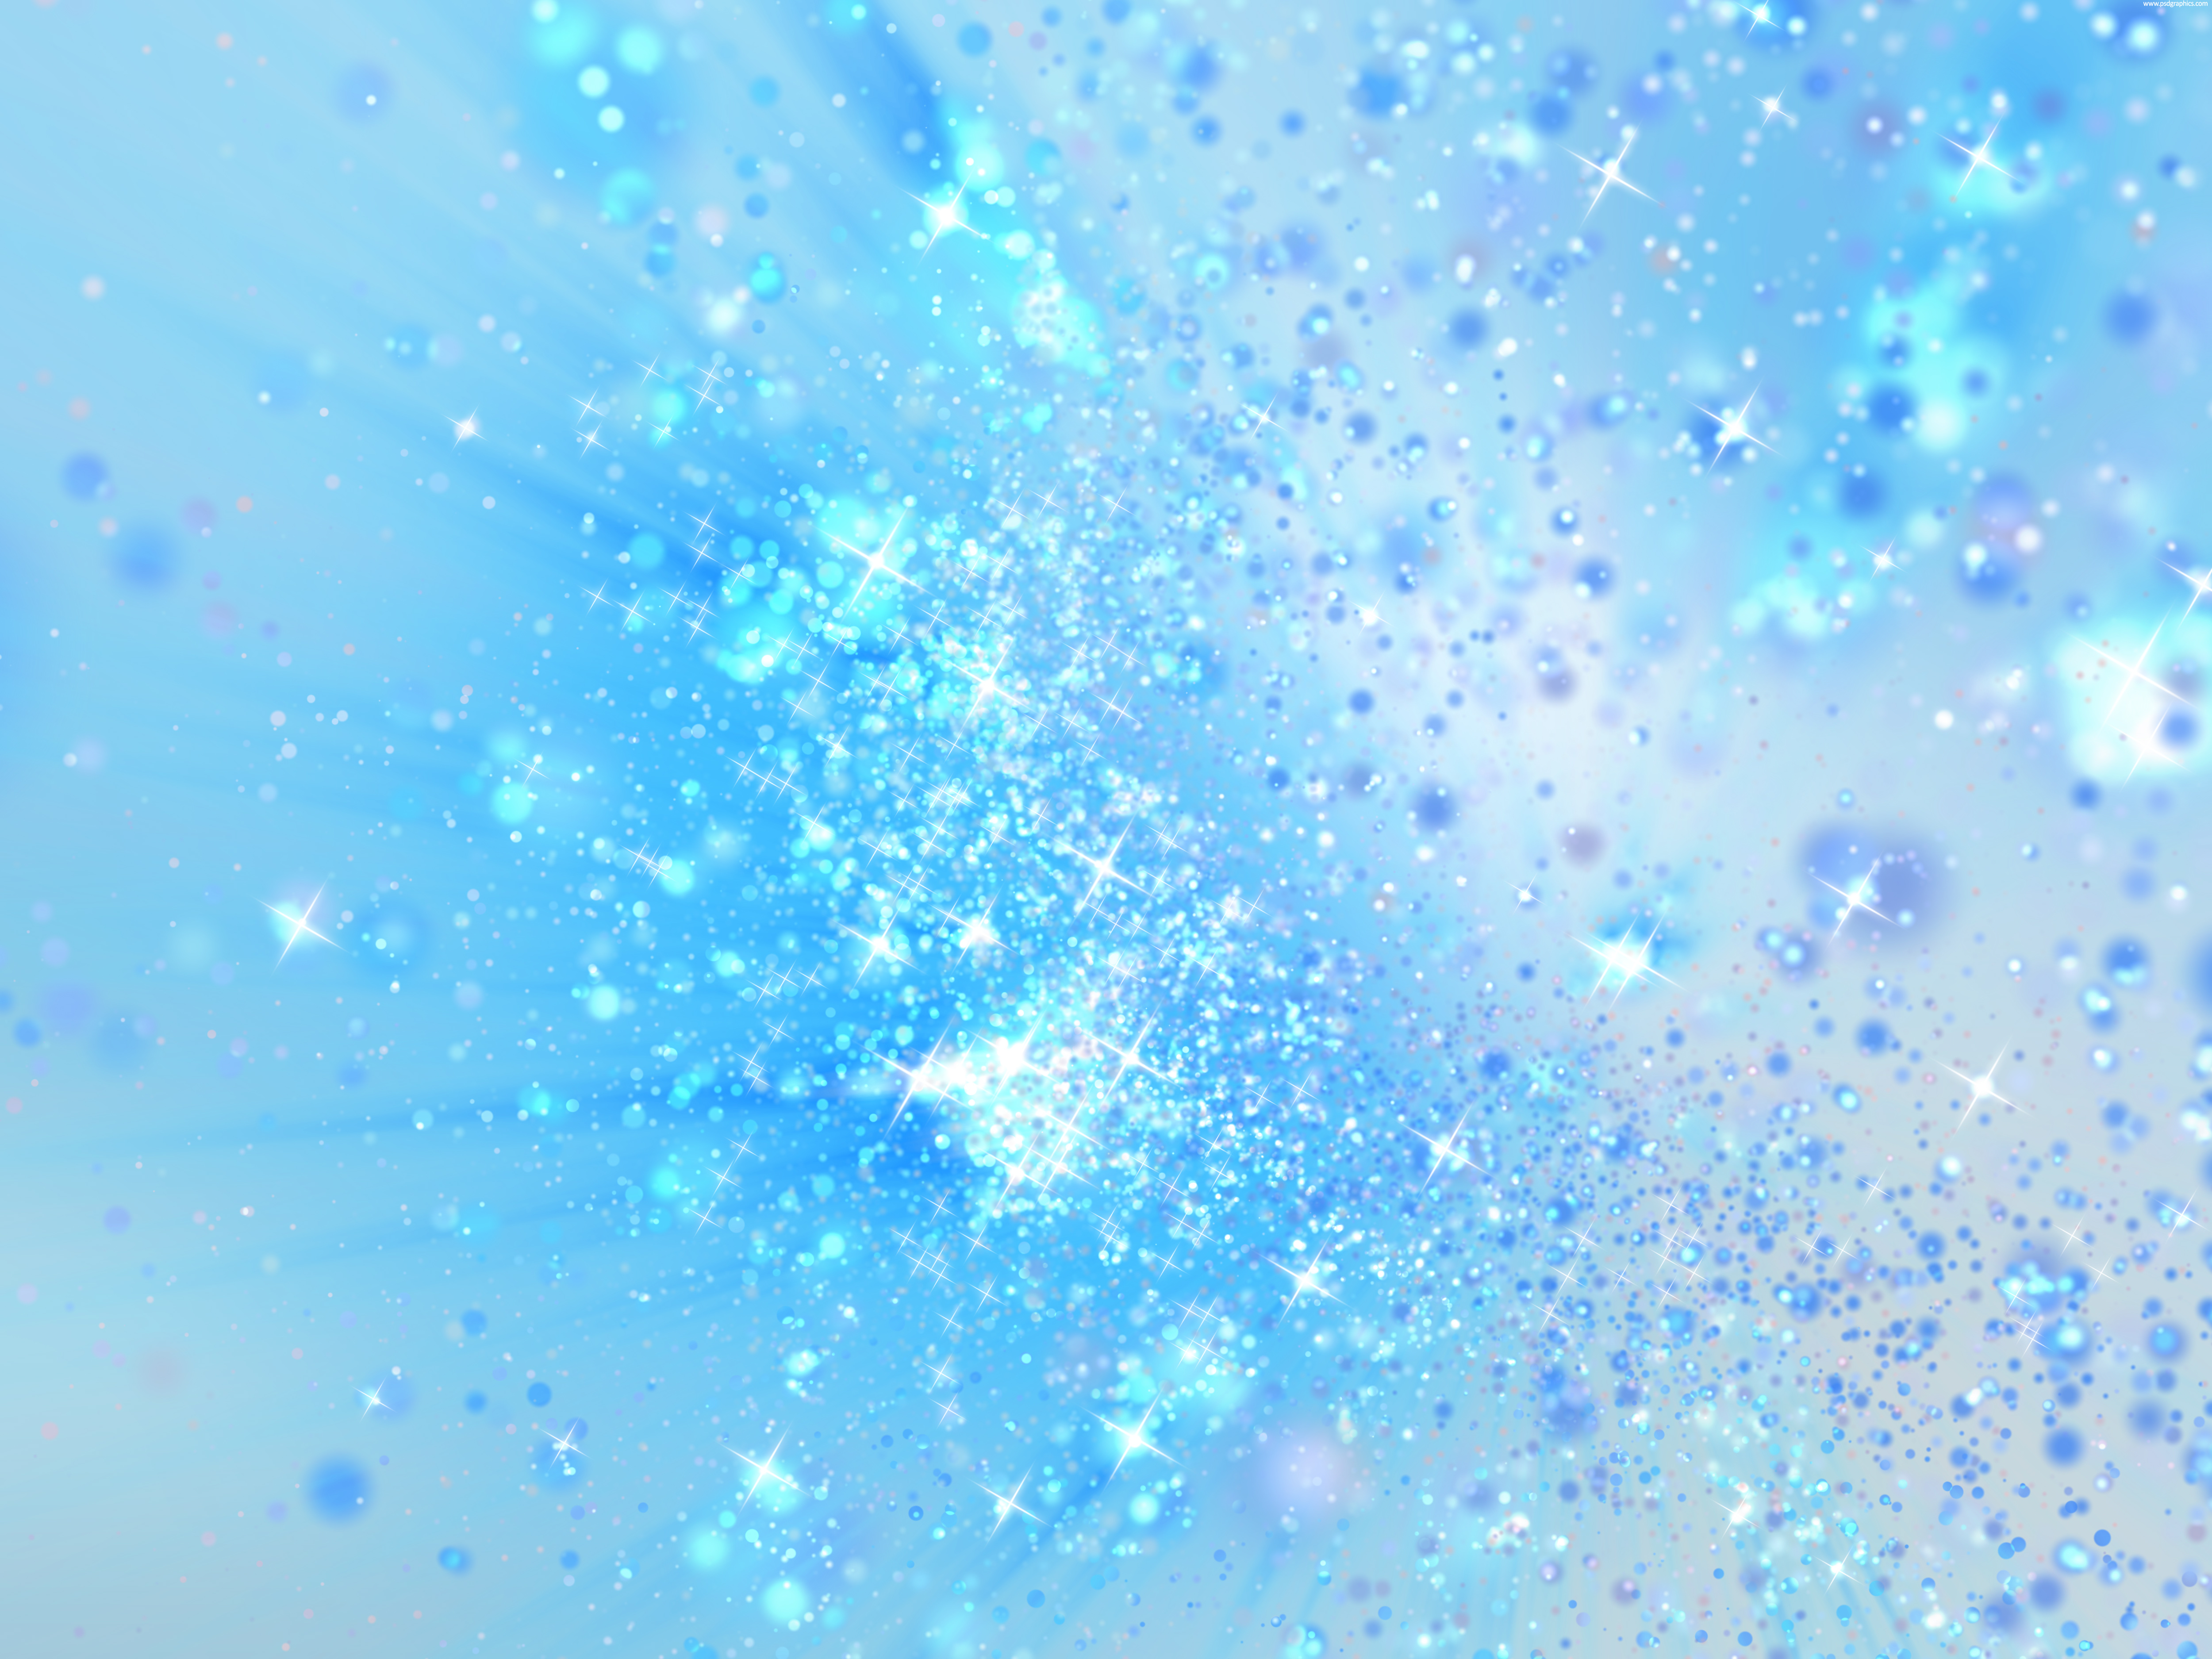 Blue Magic Dust Photo Graphic for Web, Powerpoint, Apps